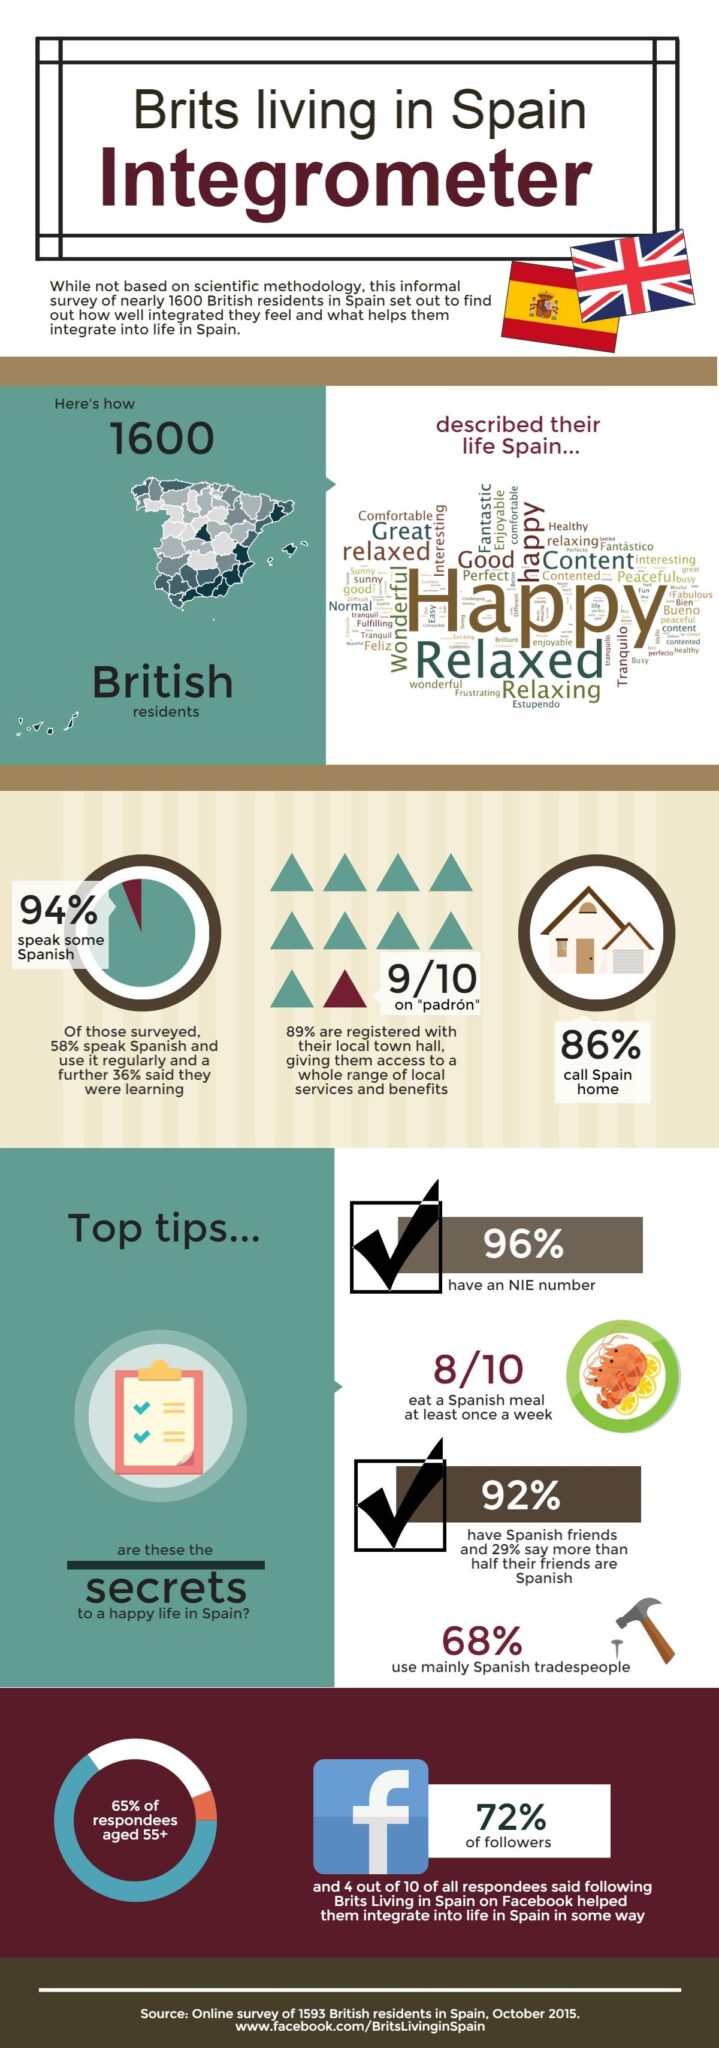 Brits living in Spain integrometer infographic